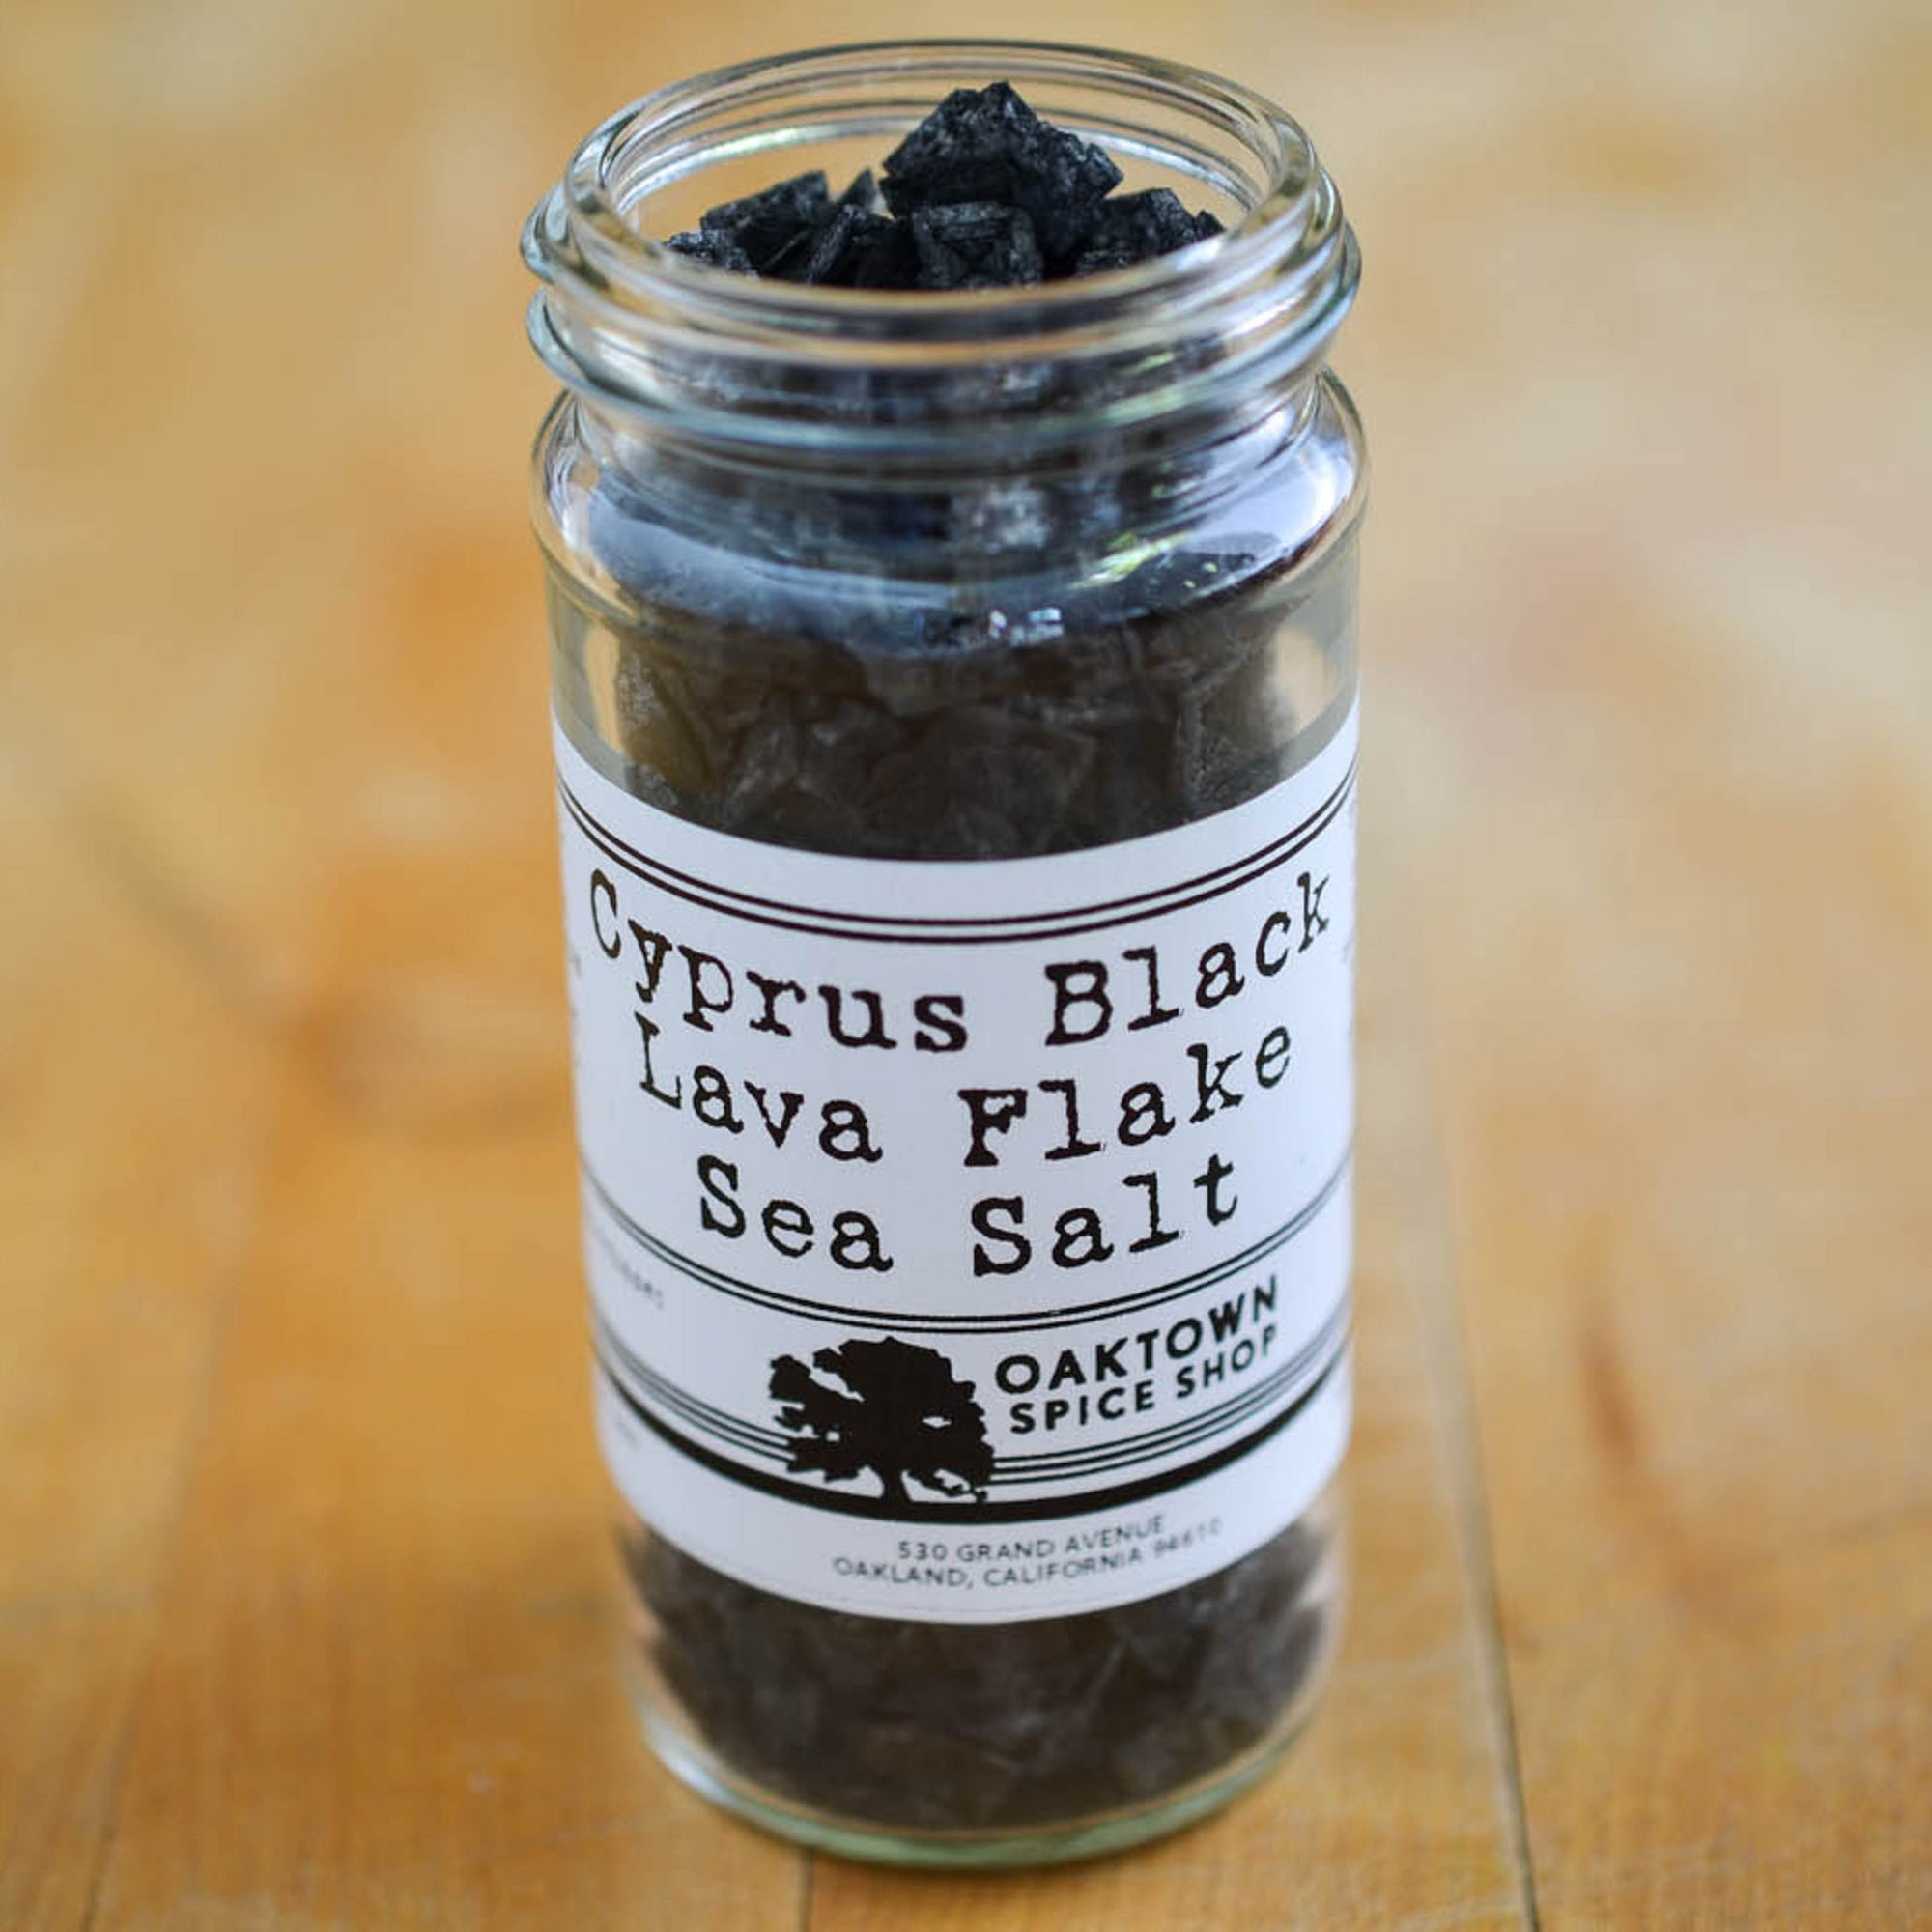 Cyprus Black Lava Flake Sea Salt by Oaktown Spice Shop is activated charcoal gives this salt its black color and a very subtle nutty flavor